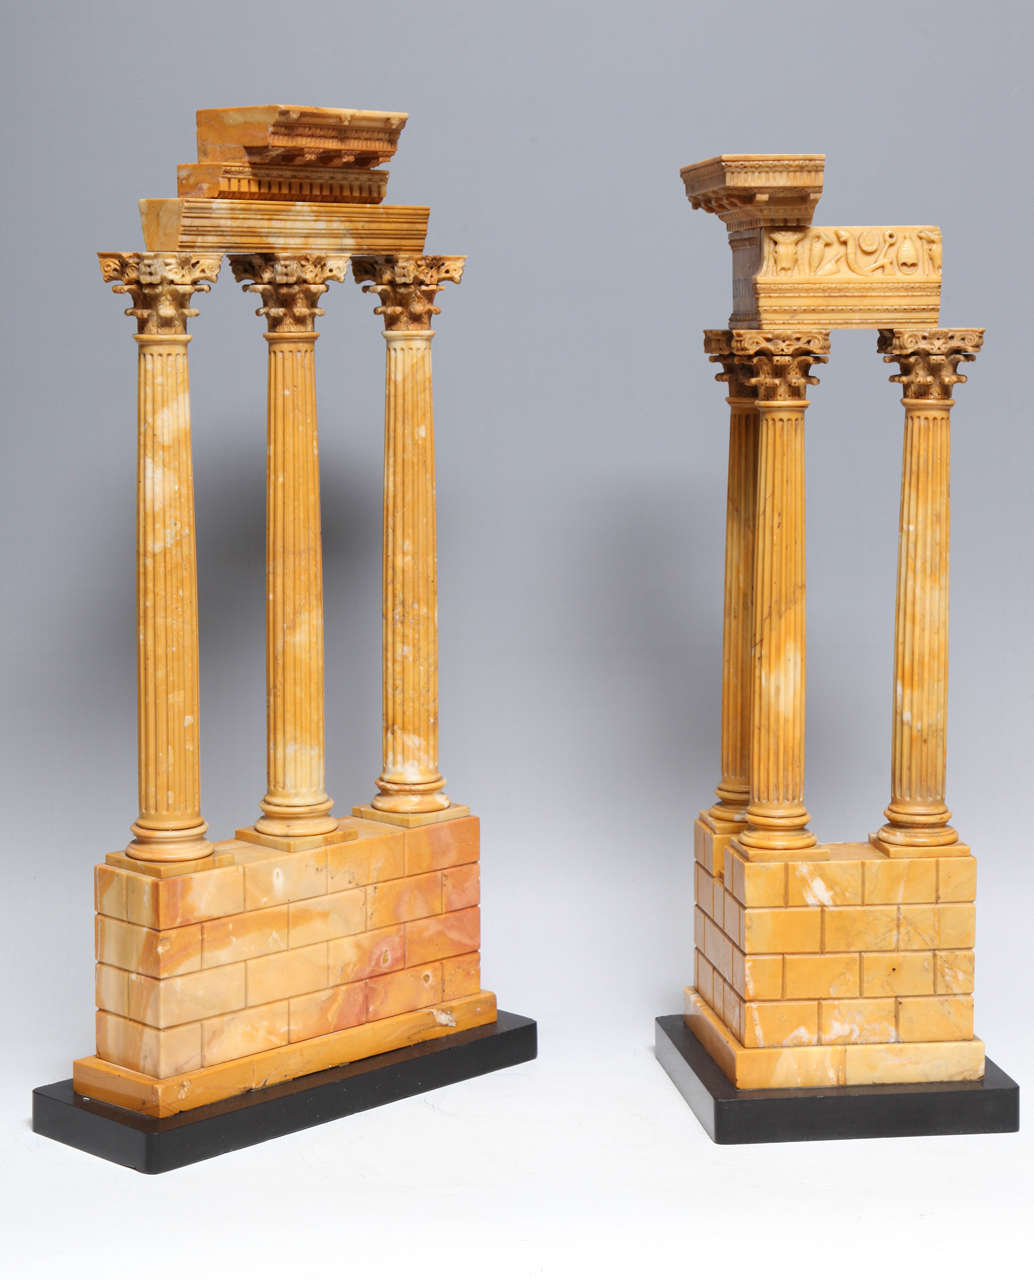 A very fine and early pair of Roman neoclassical period grand tour Sienna marble models of the Temple of Castor and Pollux and the Temple of Vespasian, early 1800s, Italian.

In the 18th and 19th century no gentlemen's education was considered